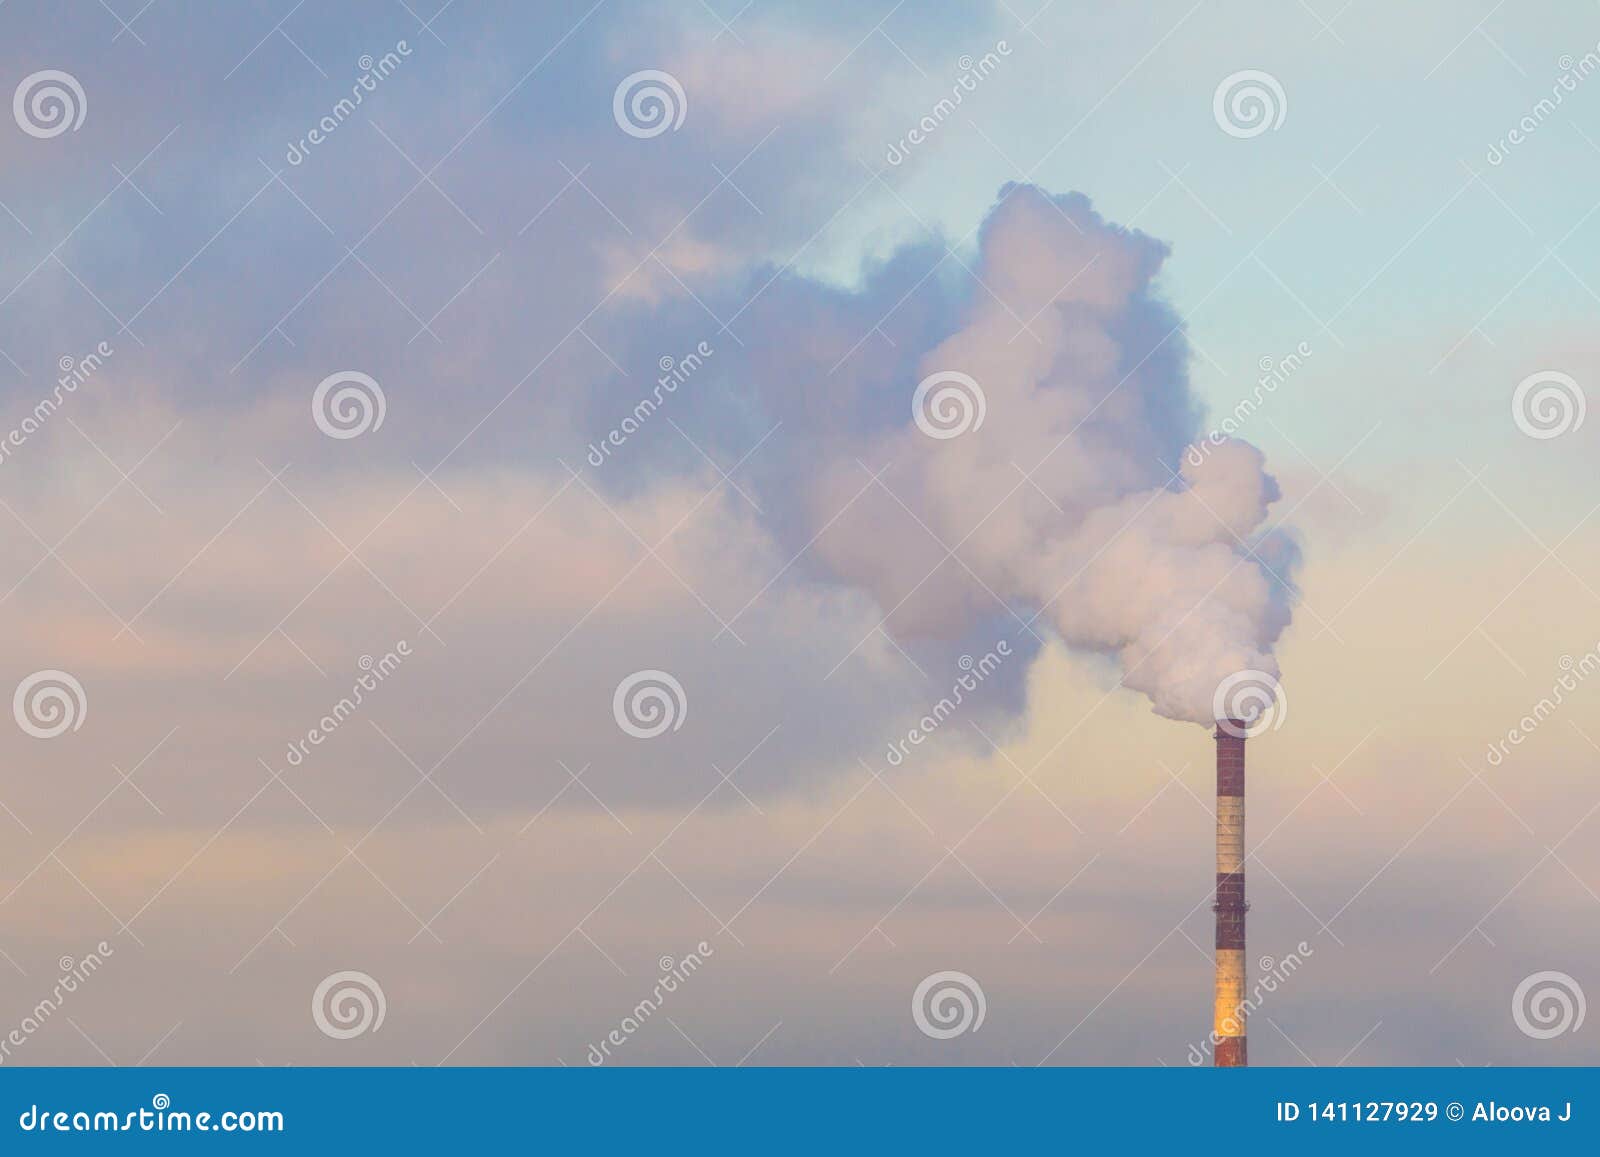 industrial smoke pipe on a sunny and cloudy sky